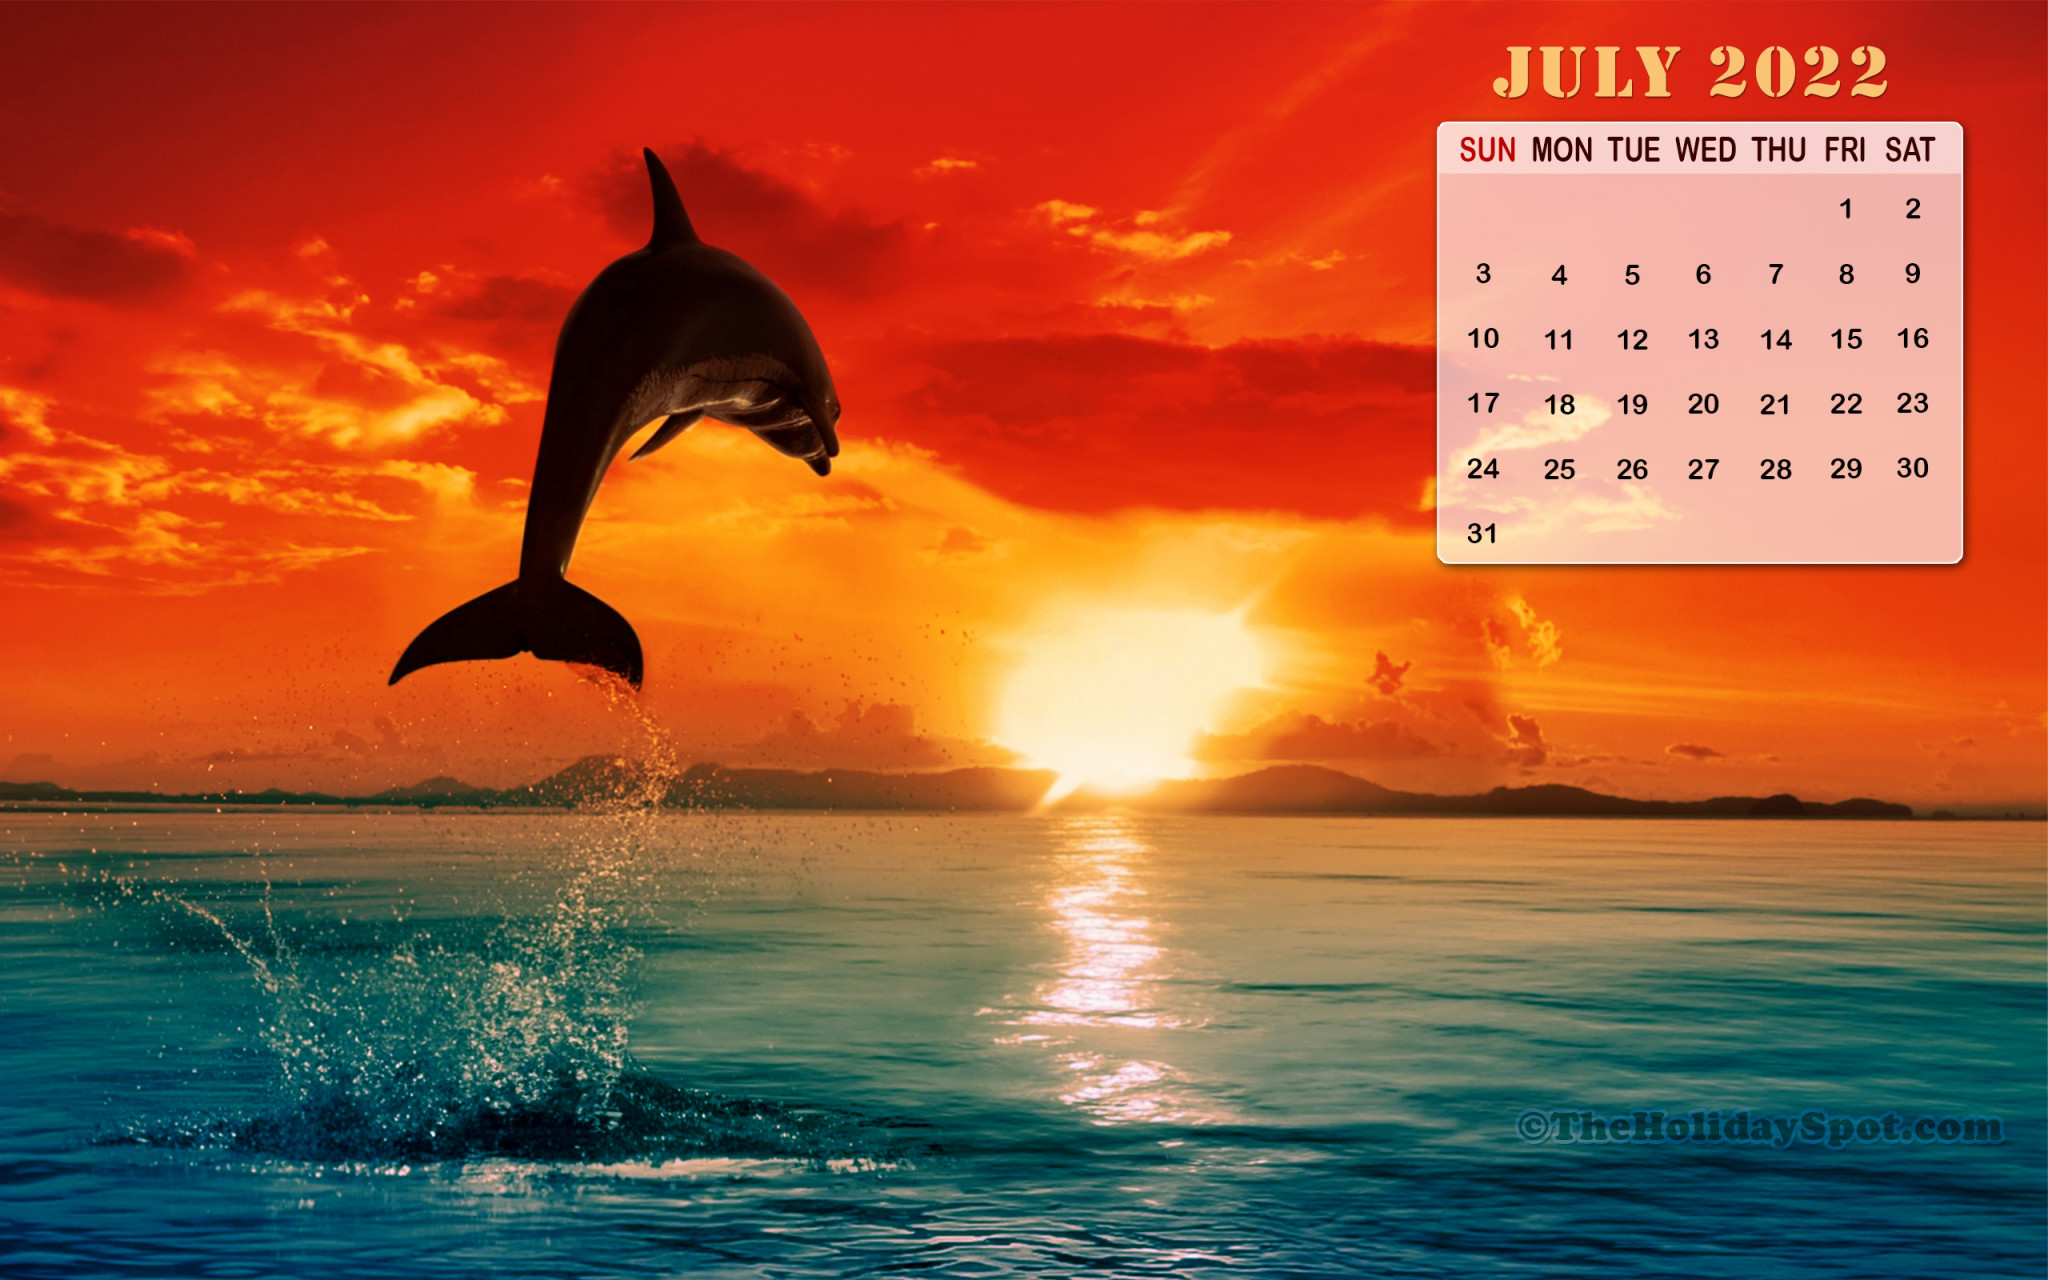 Download wallpapers 2022 July Calendar 4k background with flowers  creative art July 2022 summer calendars black and white striped  background July 2022 Calendar purple flowers for desktop free Pictures  for desktop free